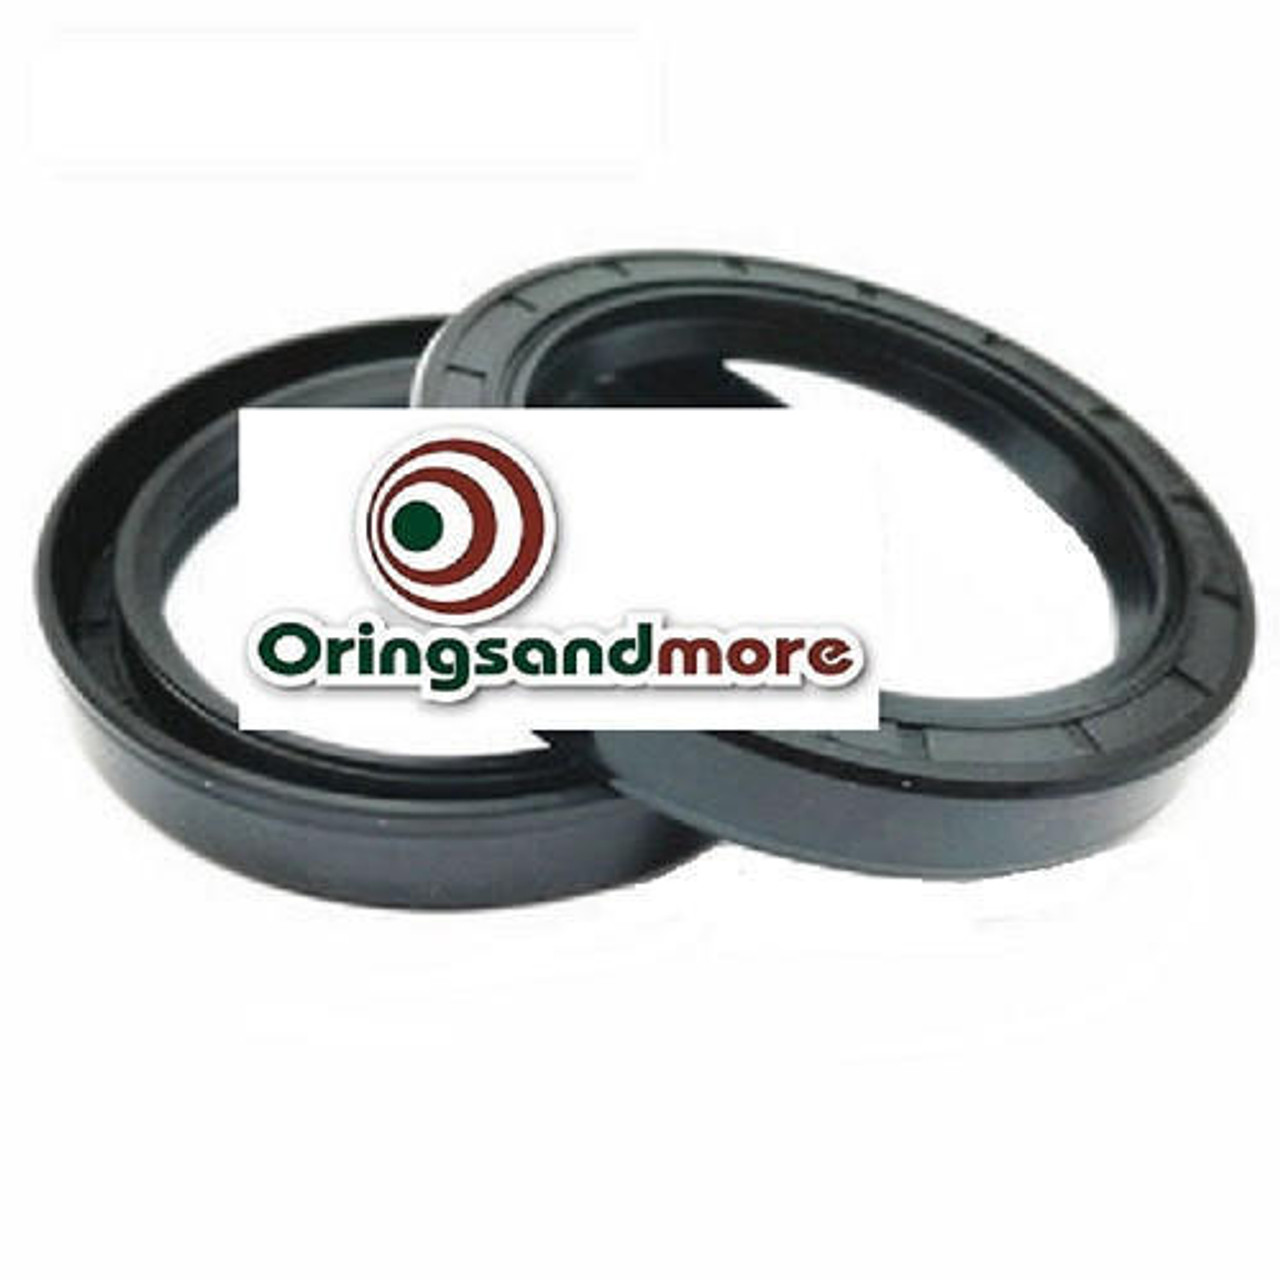 Metric Oil Shaft Seal 44 x 60 x 10mm Double Lip Price for 1 pc